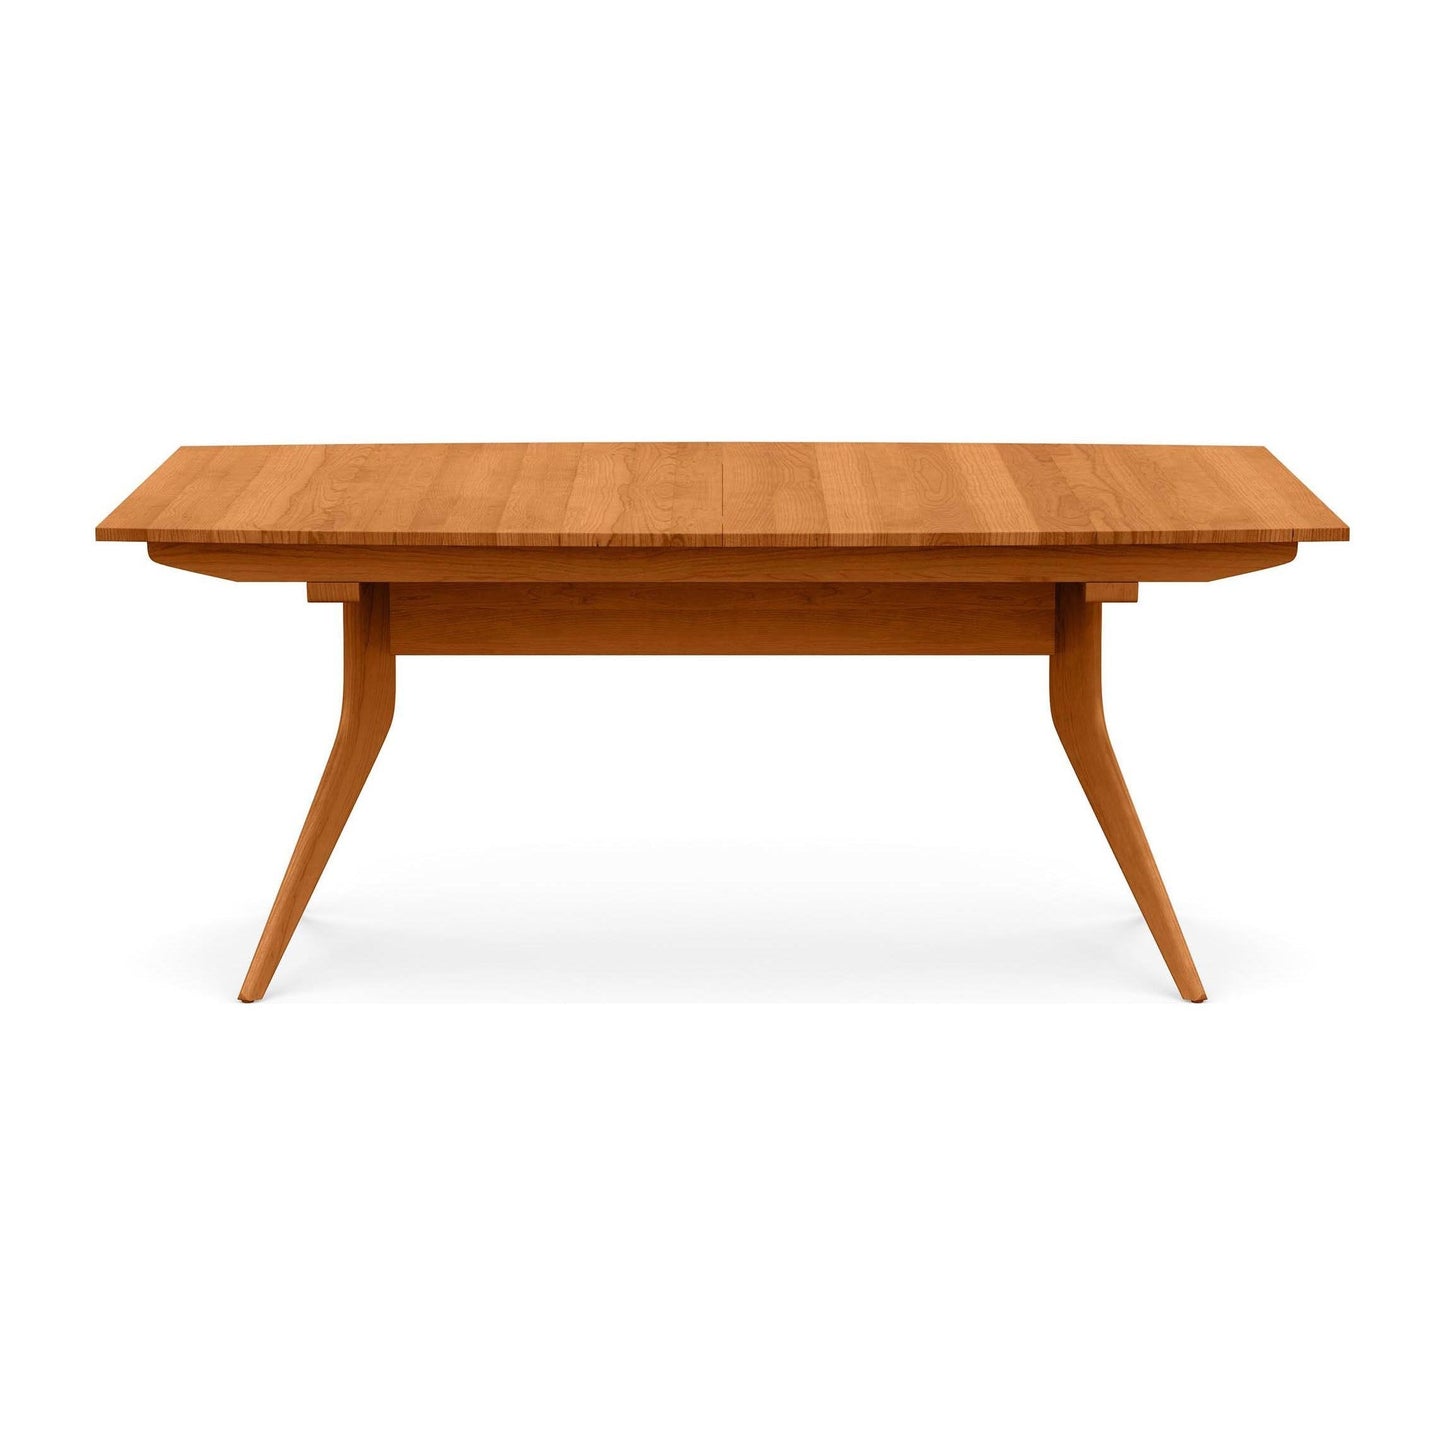 Catalina Trestle Extension Table